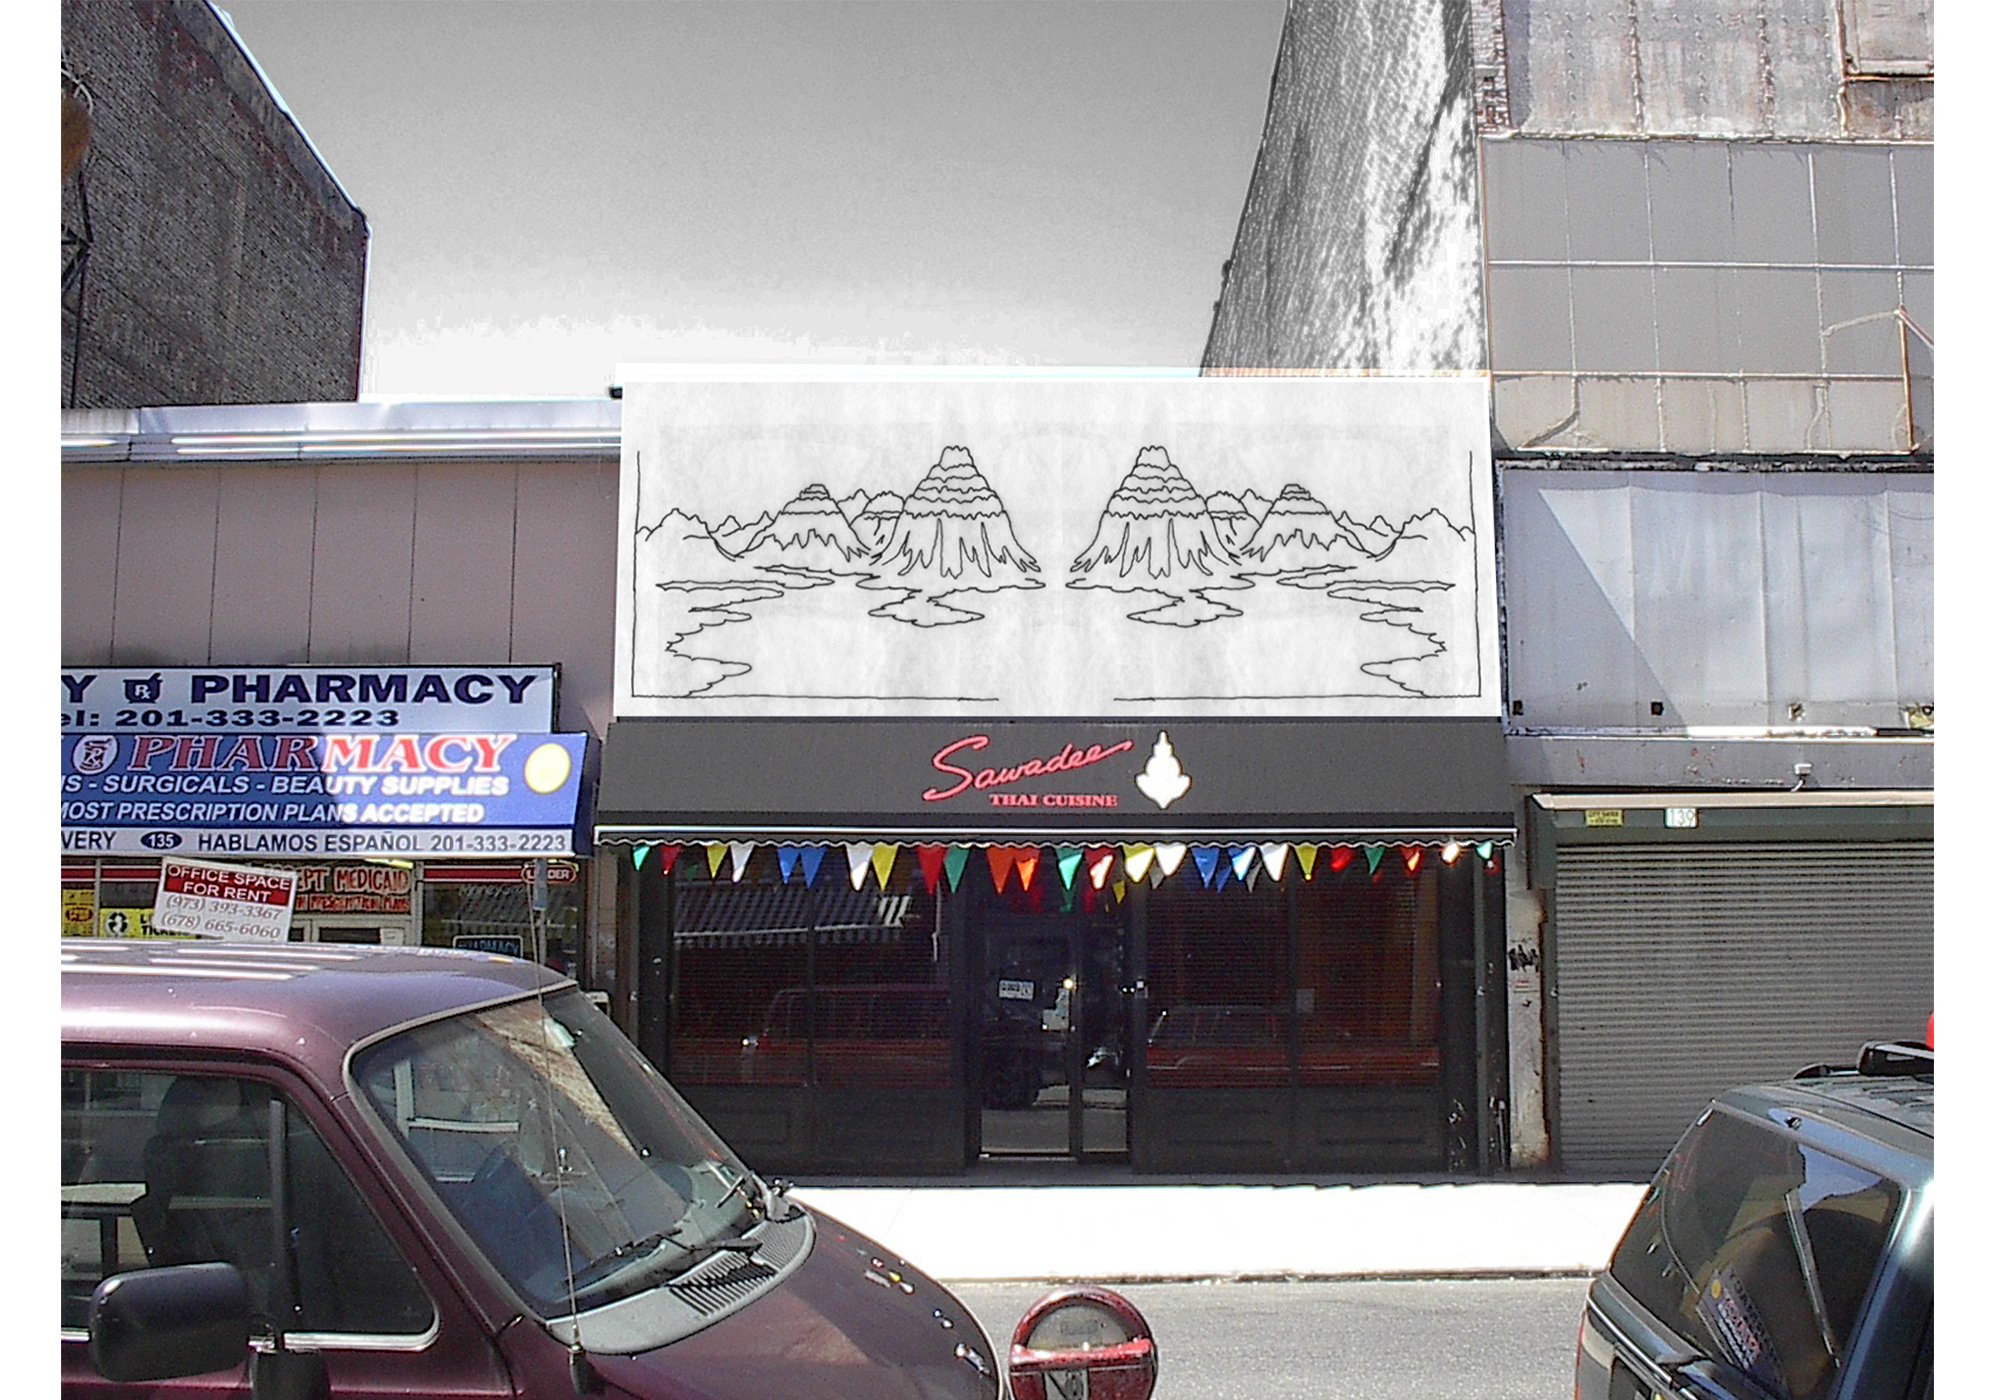 Proposal for Signage for Thai Restauraunt, Jersey City, NJ